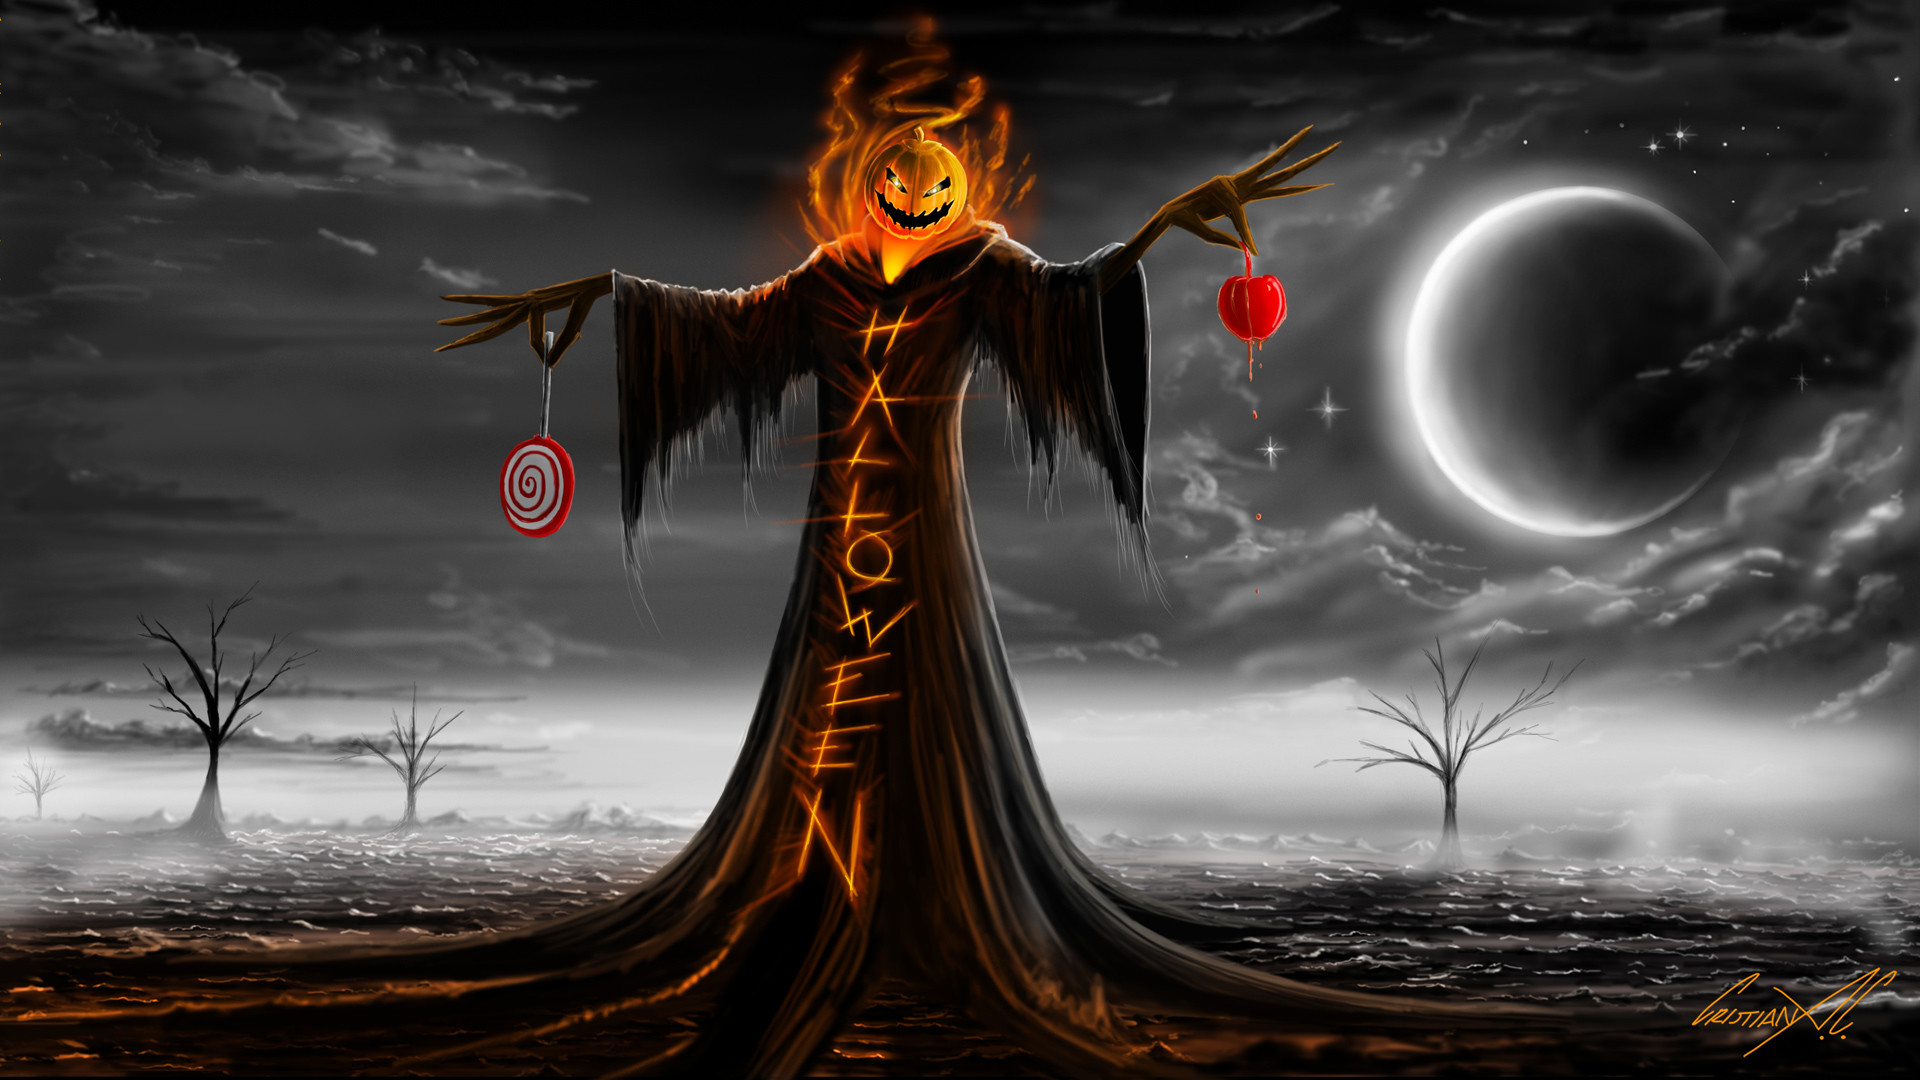 1920x1080 Halloween Specter Scarecrow Pumpkin Fire Flames Tunic Lollipops Moon Stars  Clouds Night Trees Desert Scare Fear Painting hd wallpaper by LadyGaga